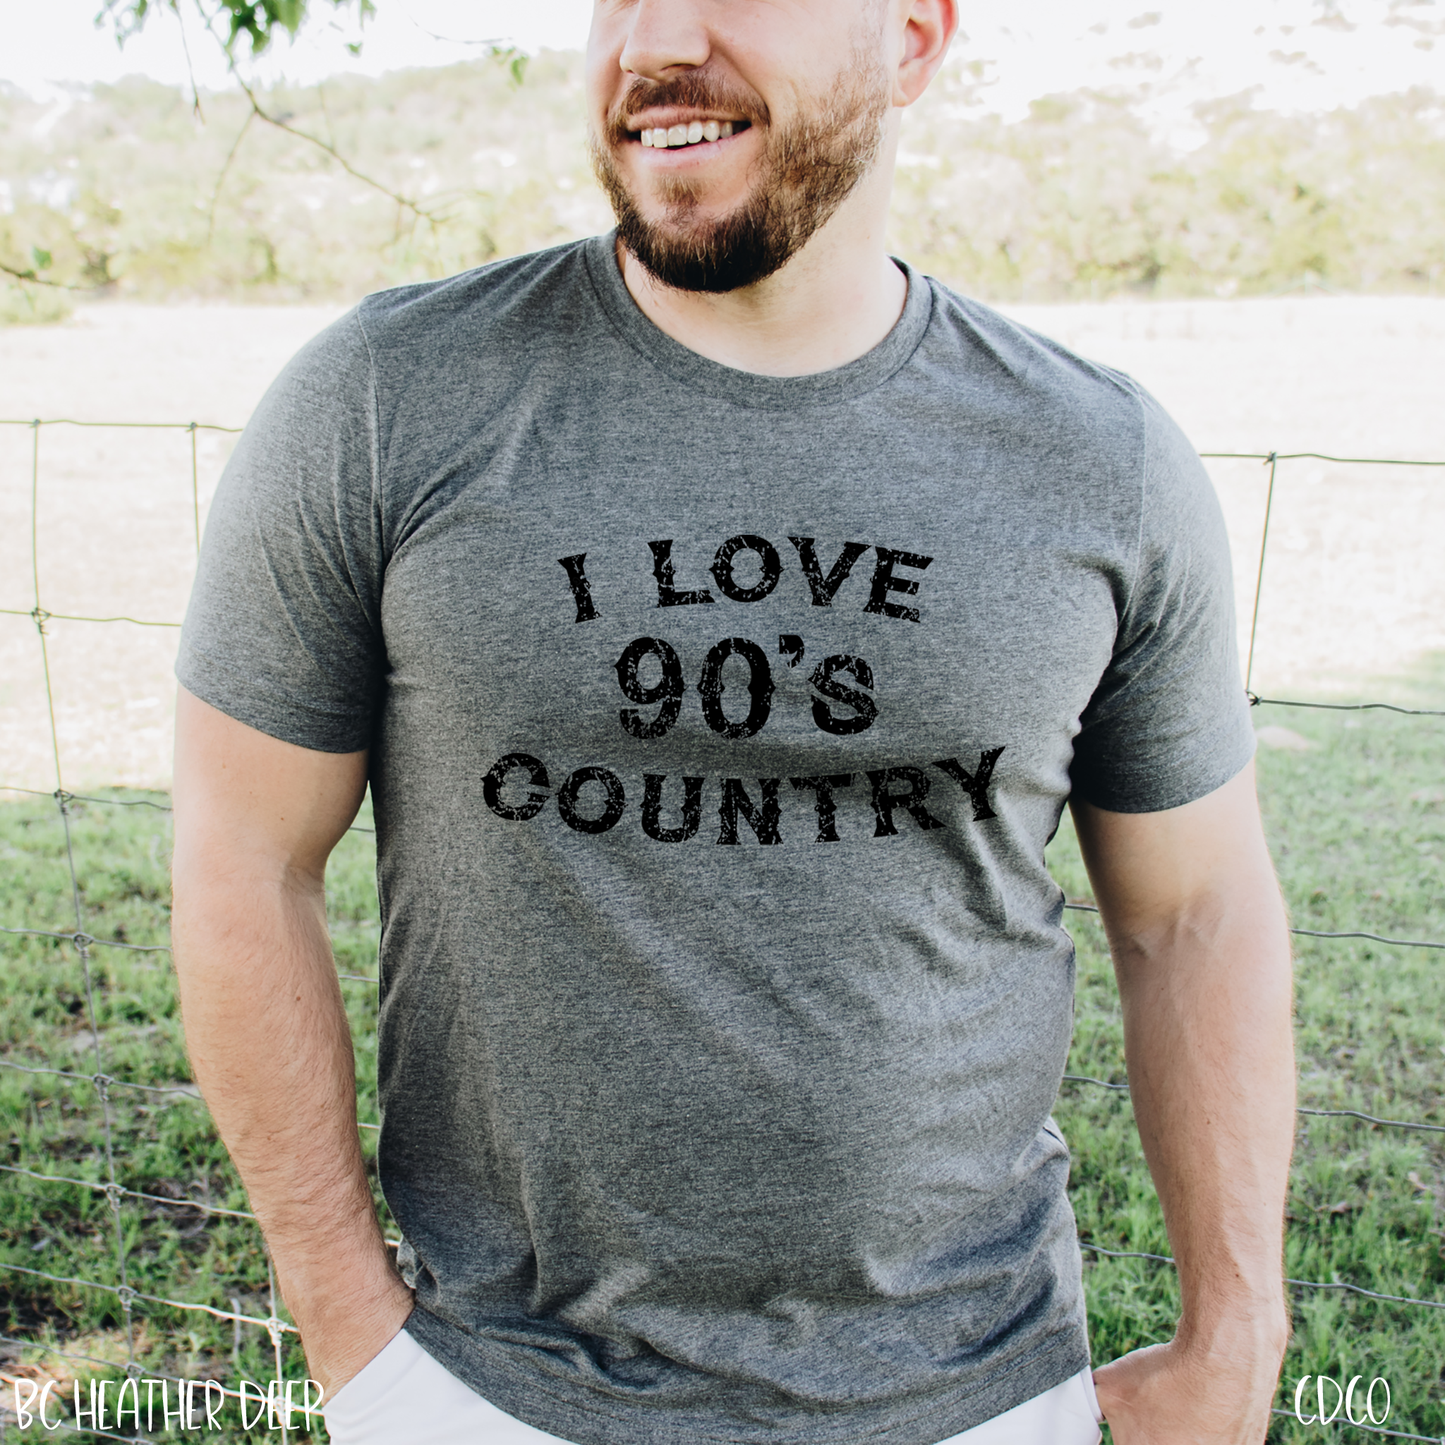 I Love 90's Country (325°)